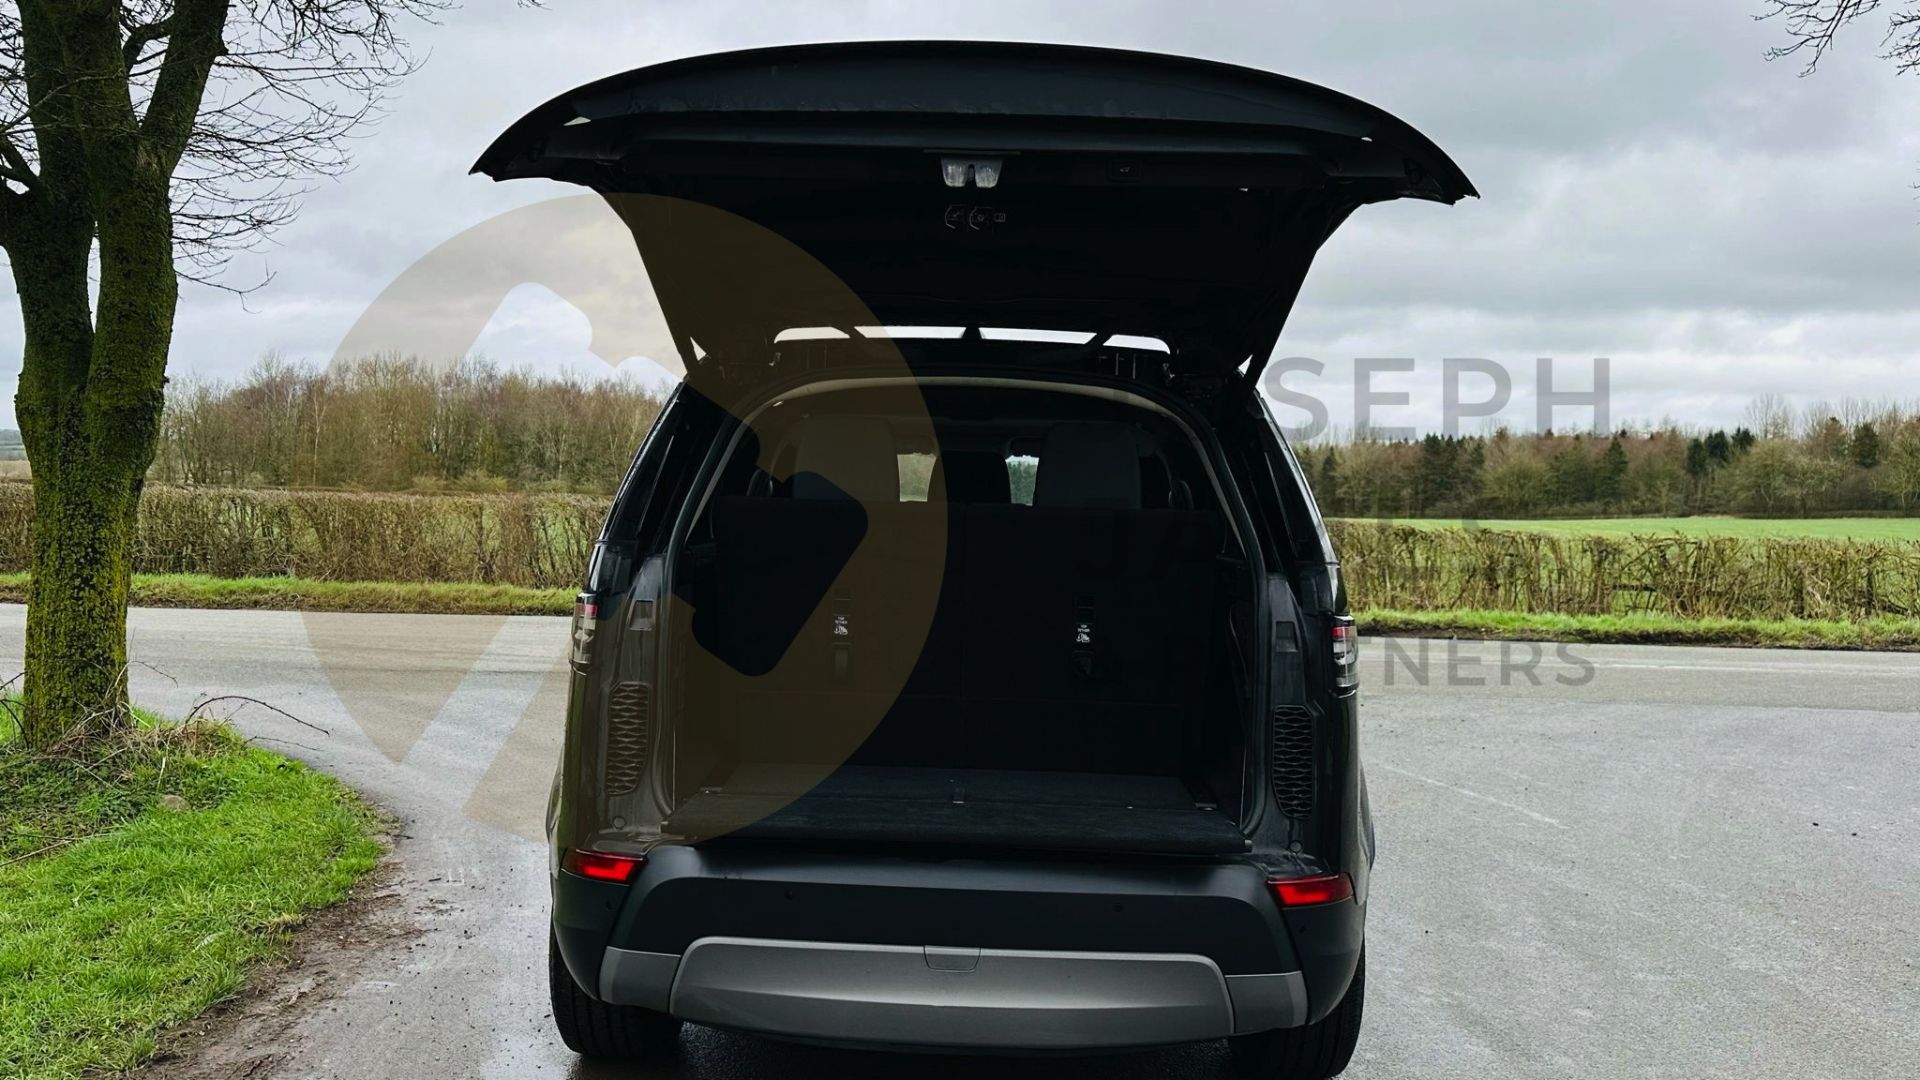 LAND ROVER DISCOVERY 5 *SE EDITION* 7 SEATER SUV (2020 - EURO 6 DIESEL) 8 SPEED AUTO *HUGE SPEC* - Image 15 of 57